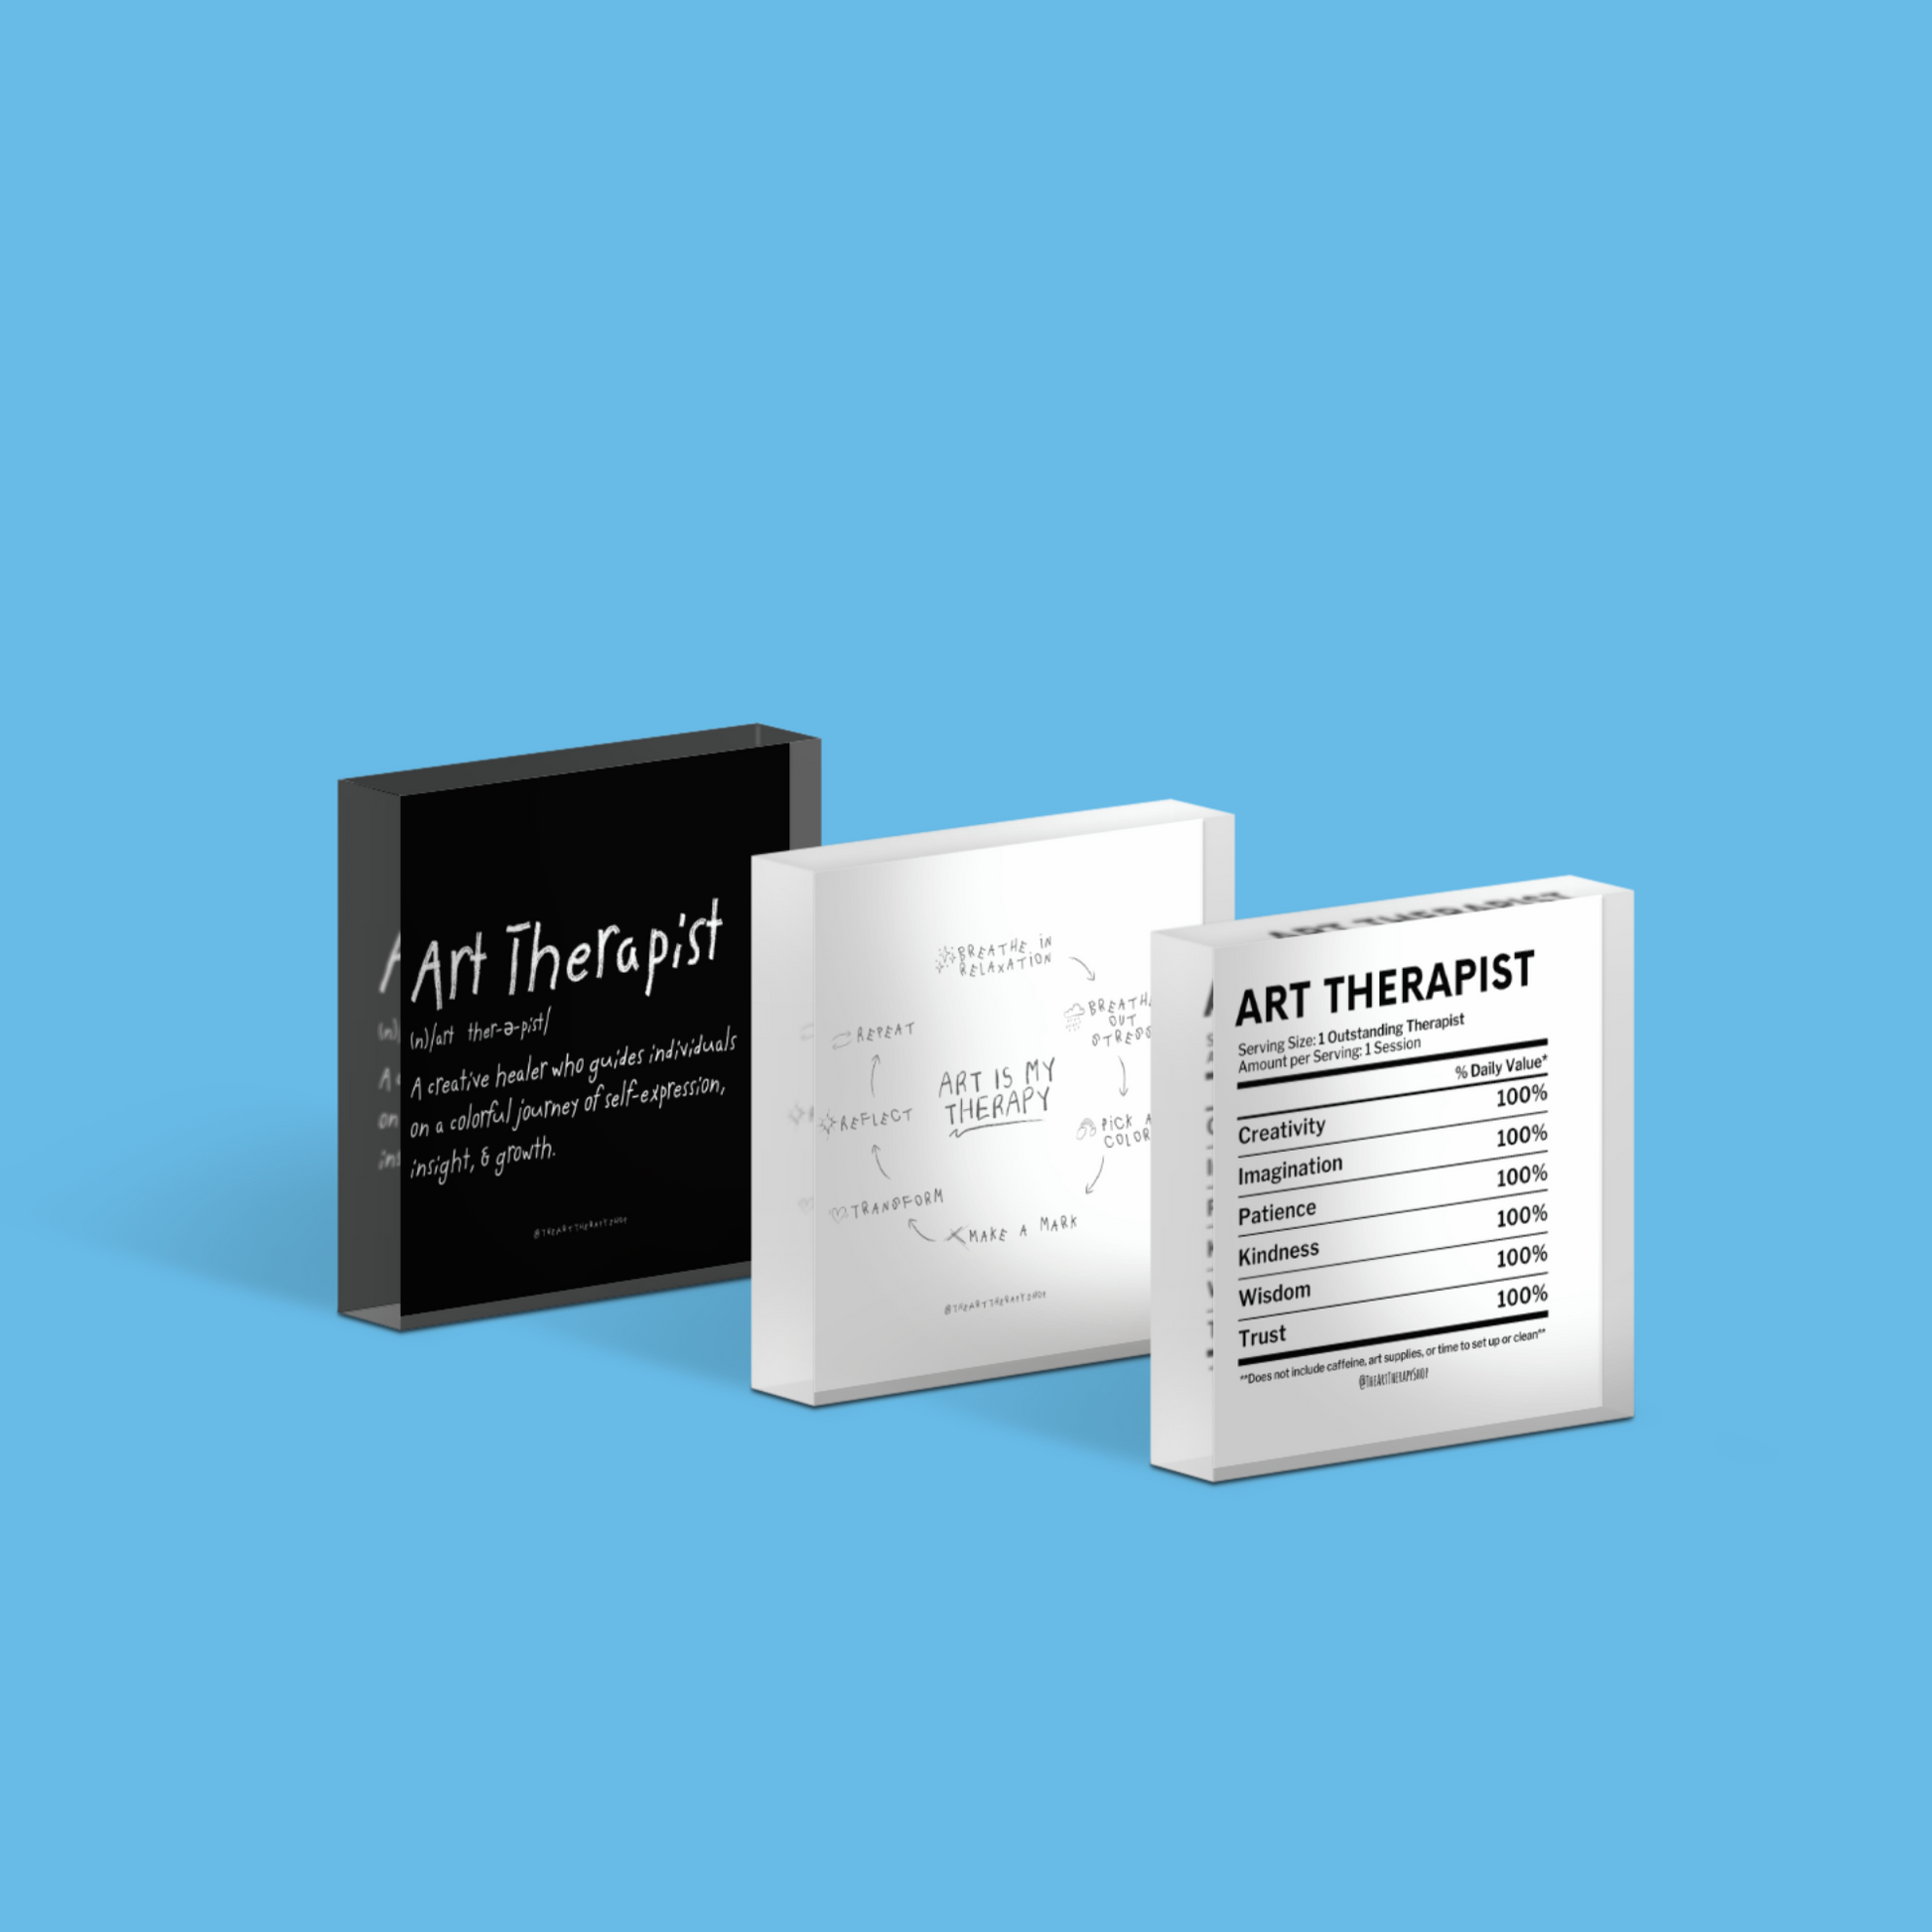 Art Therapist Nutrition Facts, Art is my therapy, art therapist defined Acrylic Blocks